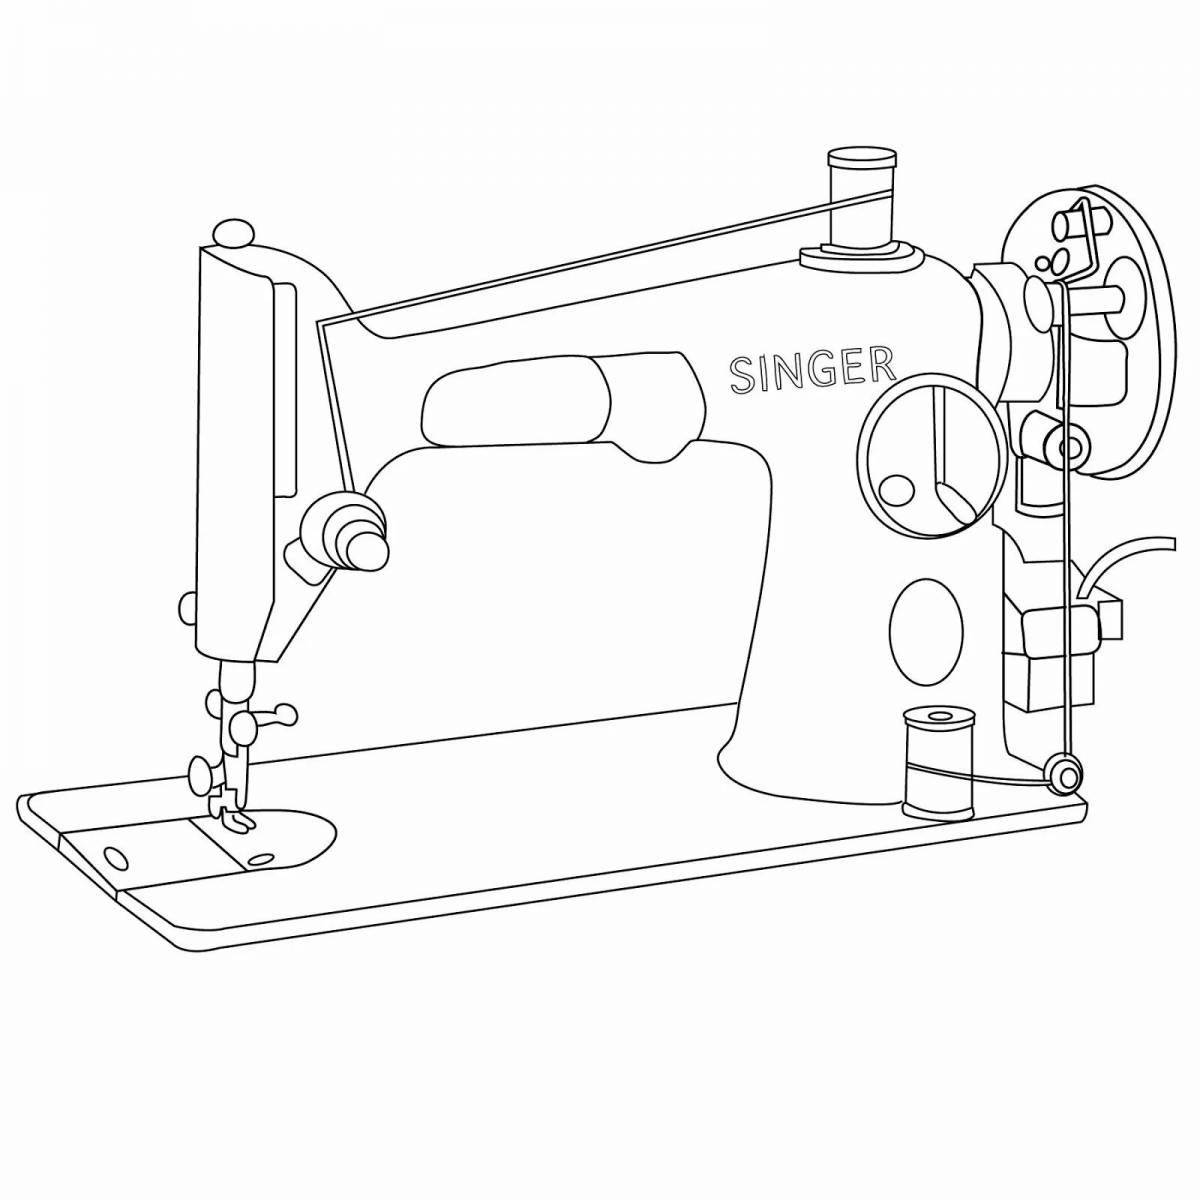 Bright sewing machine coloring book